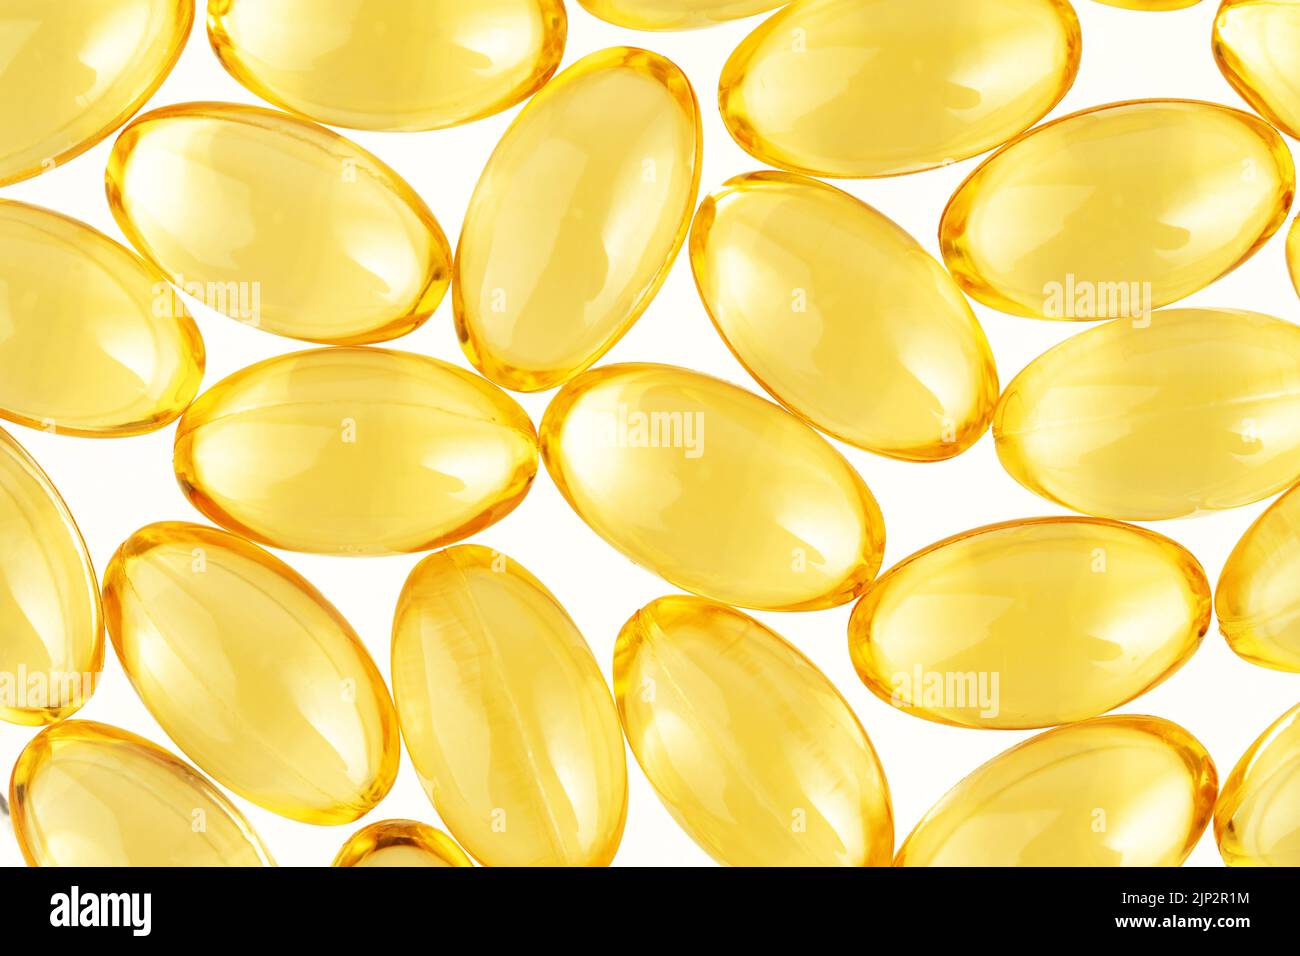 Close up of Omega 3 capsules on white background. Top view Stock Photo